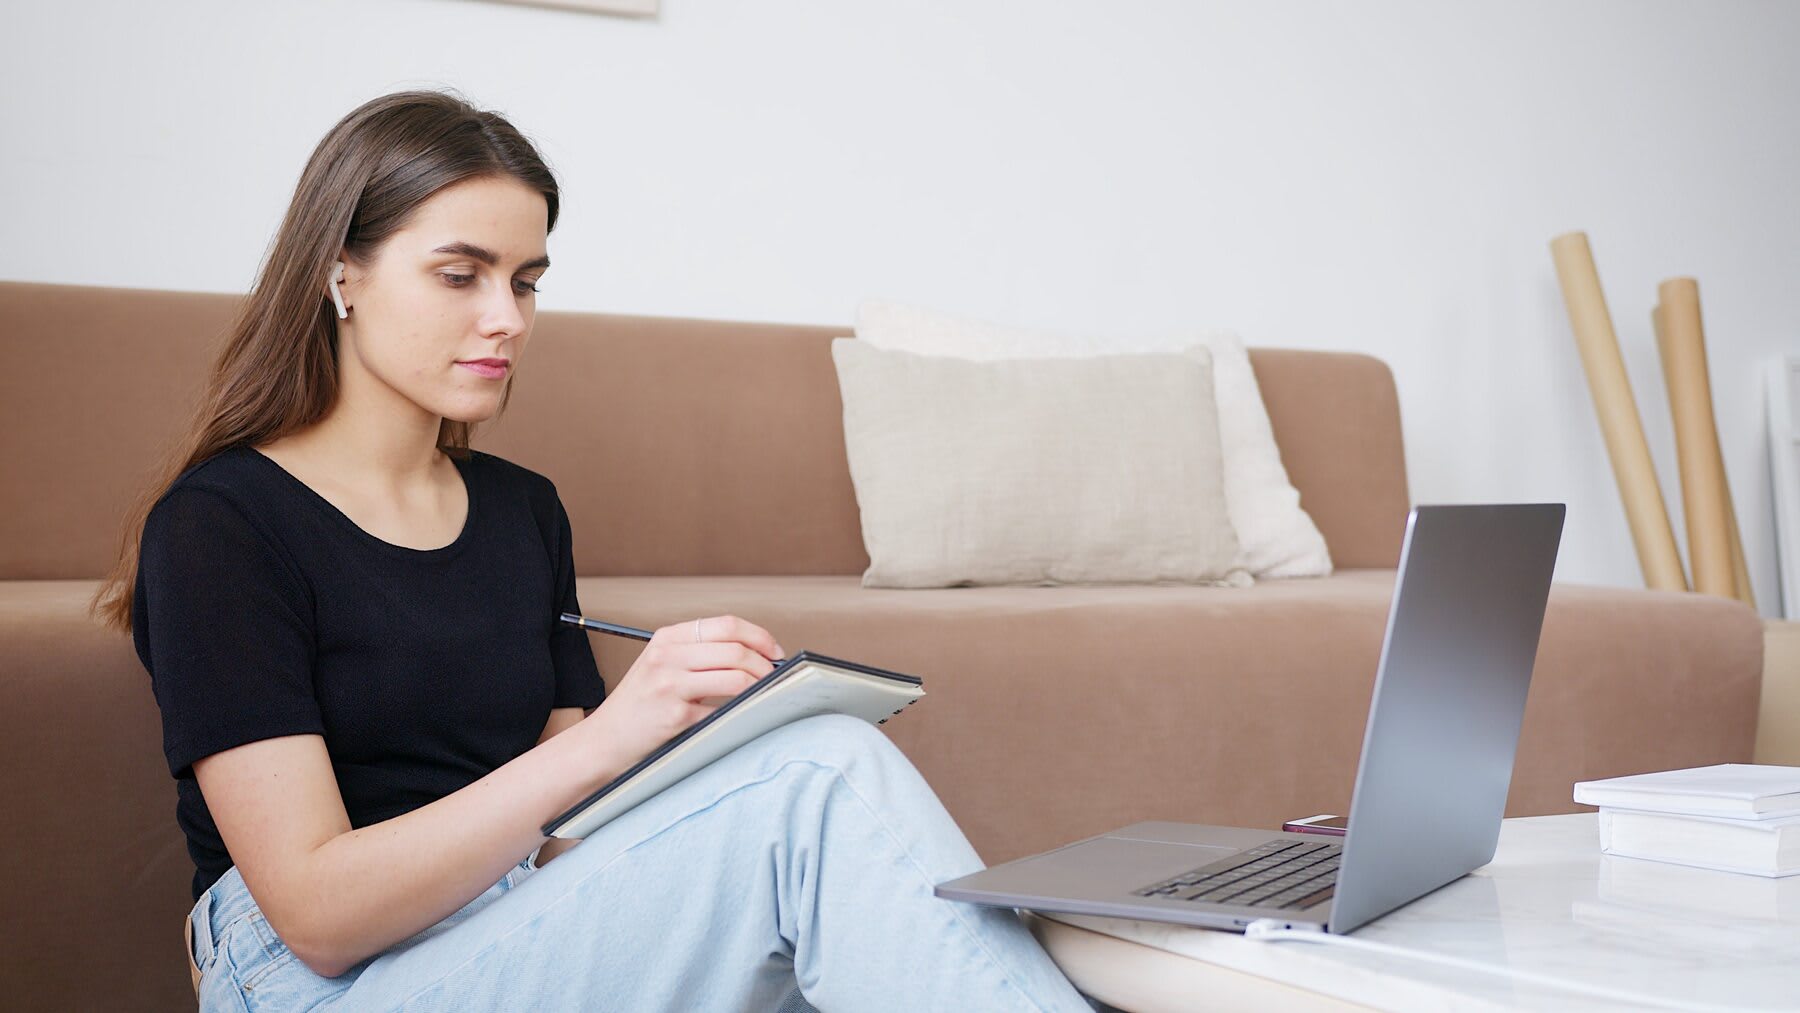 Woman writing on her notebook while looking at her laptop